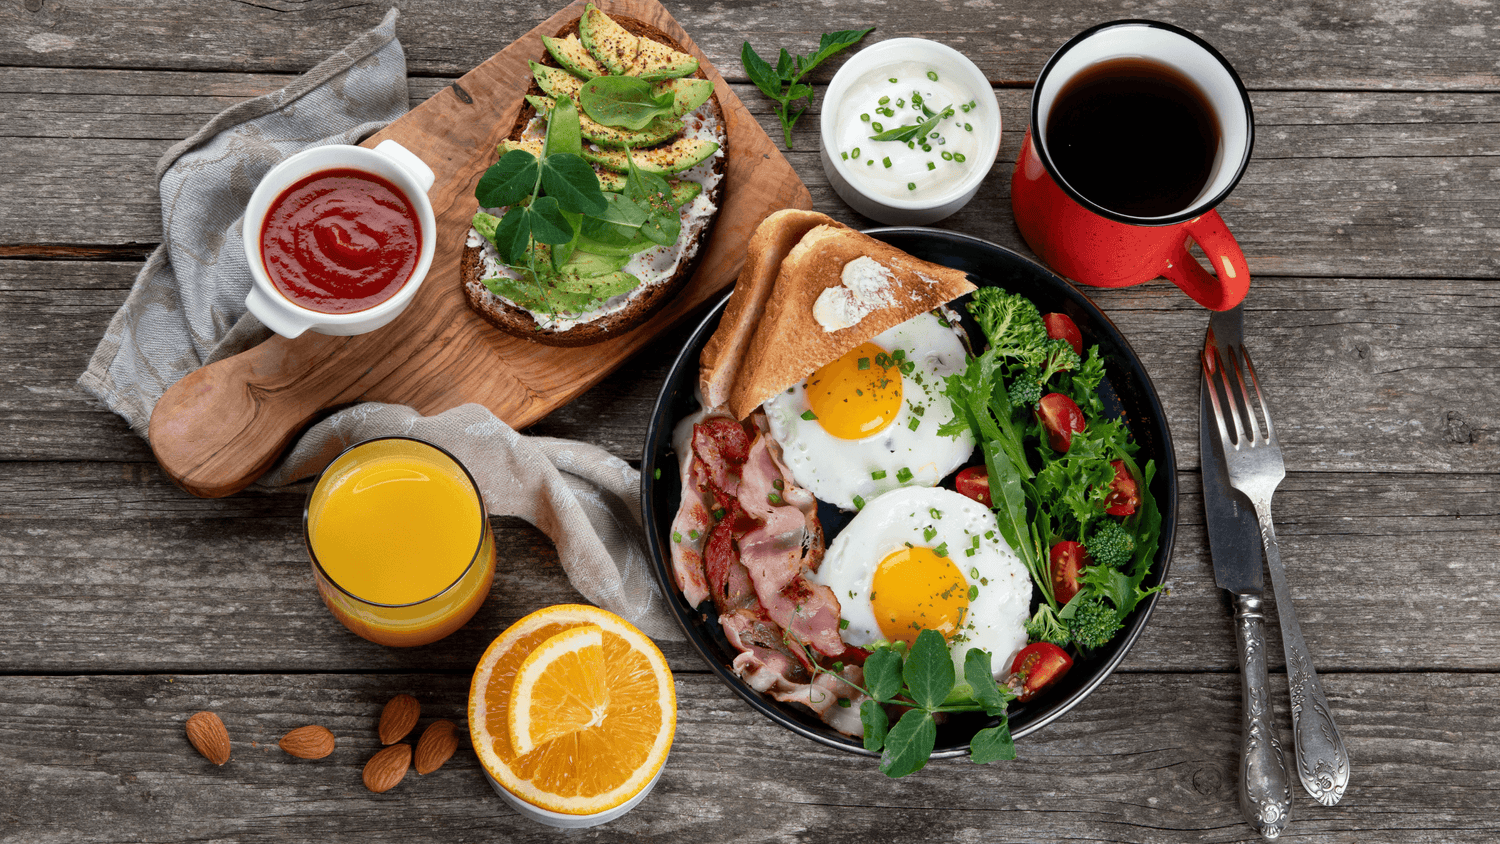 Healthy breakfast food tips for eating at home and on the go - Lepulse